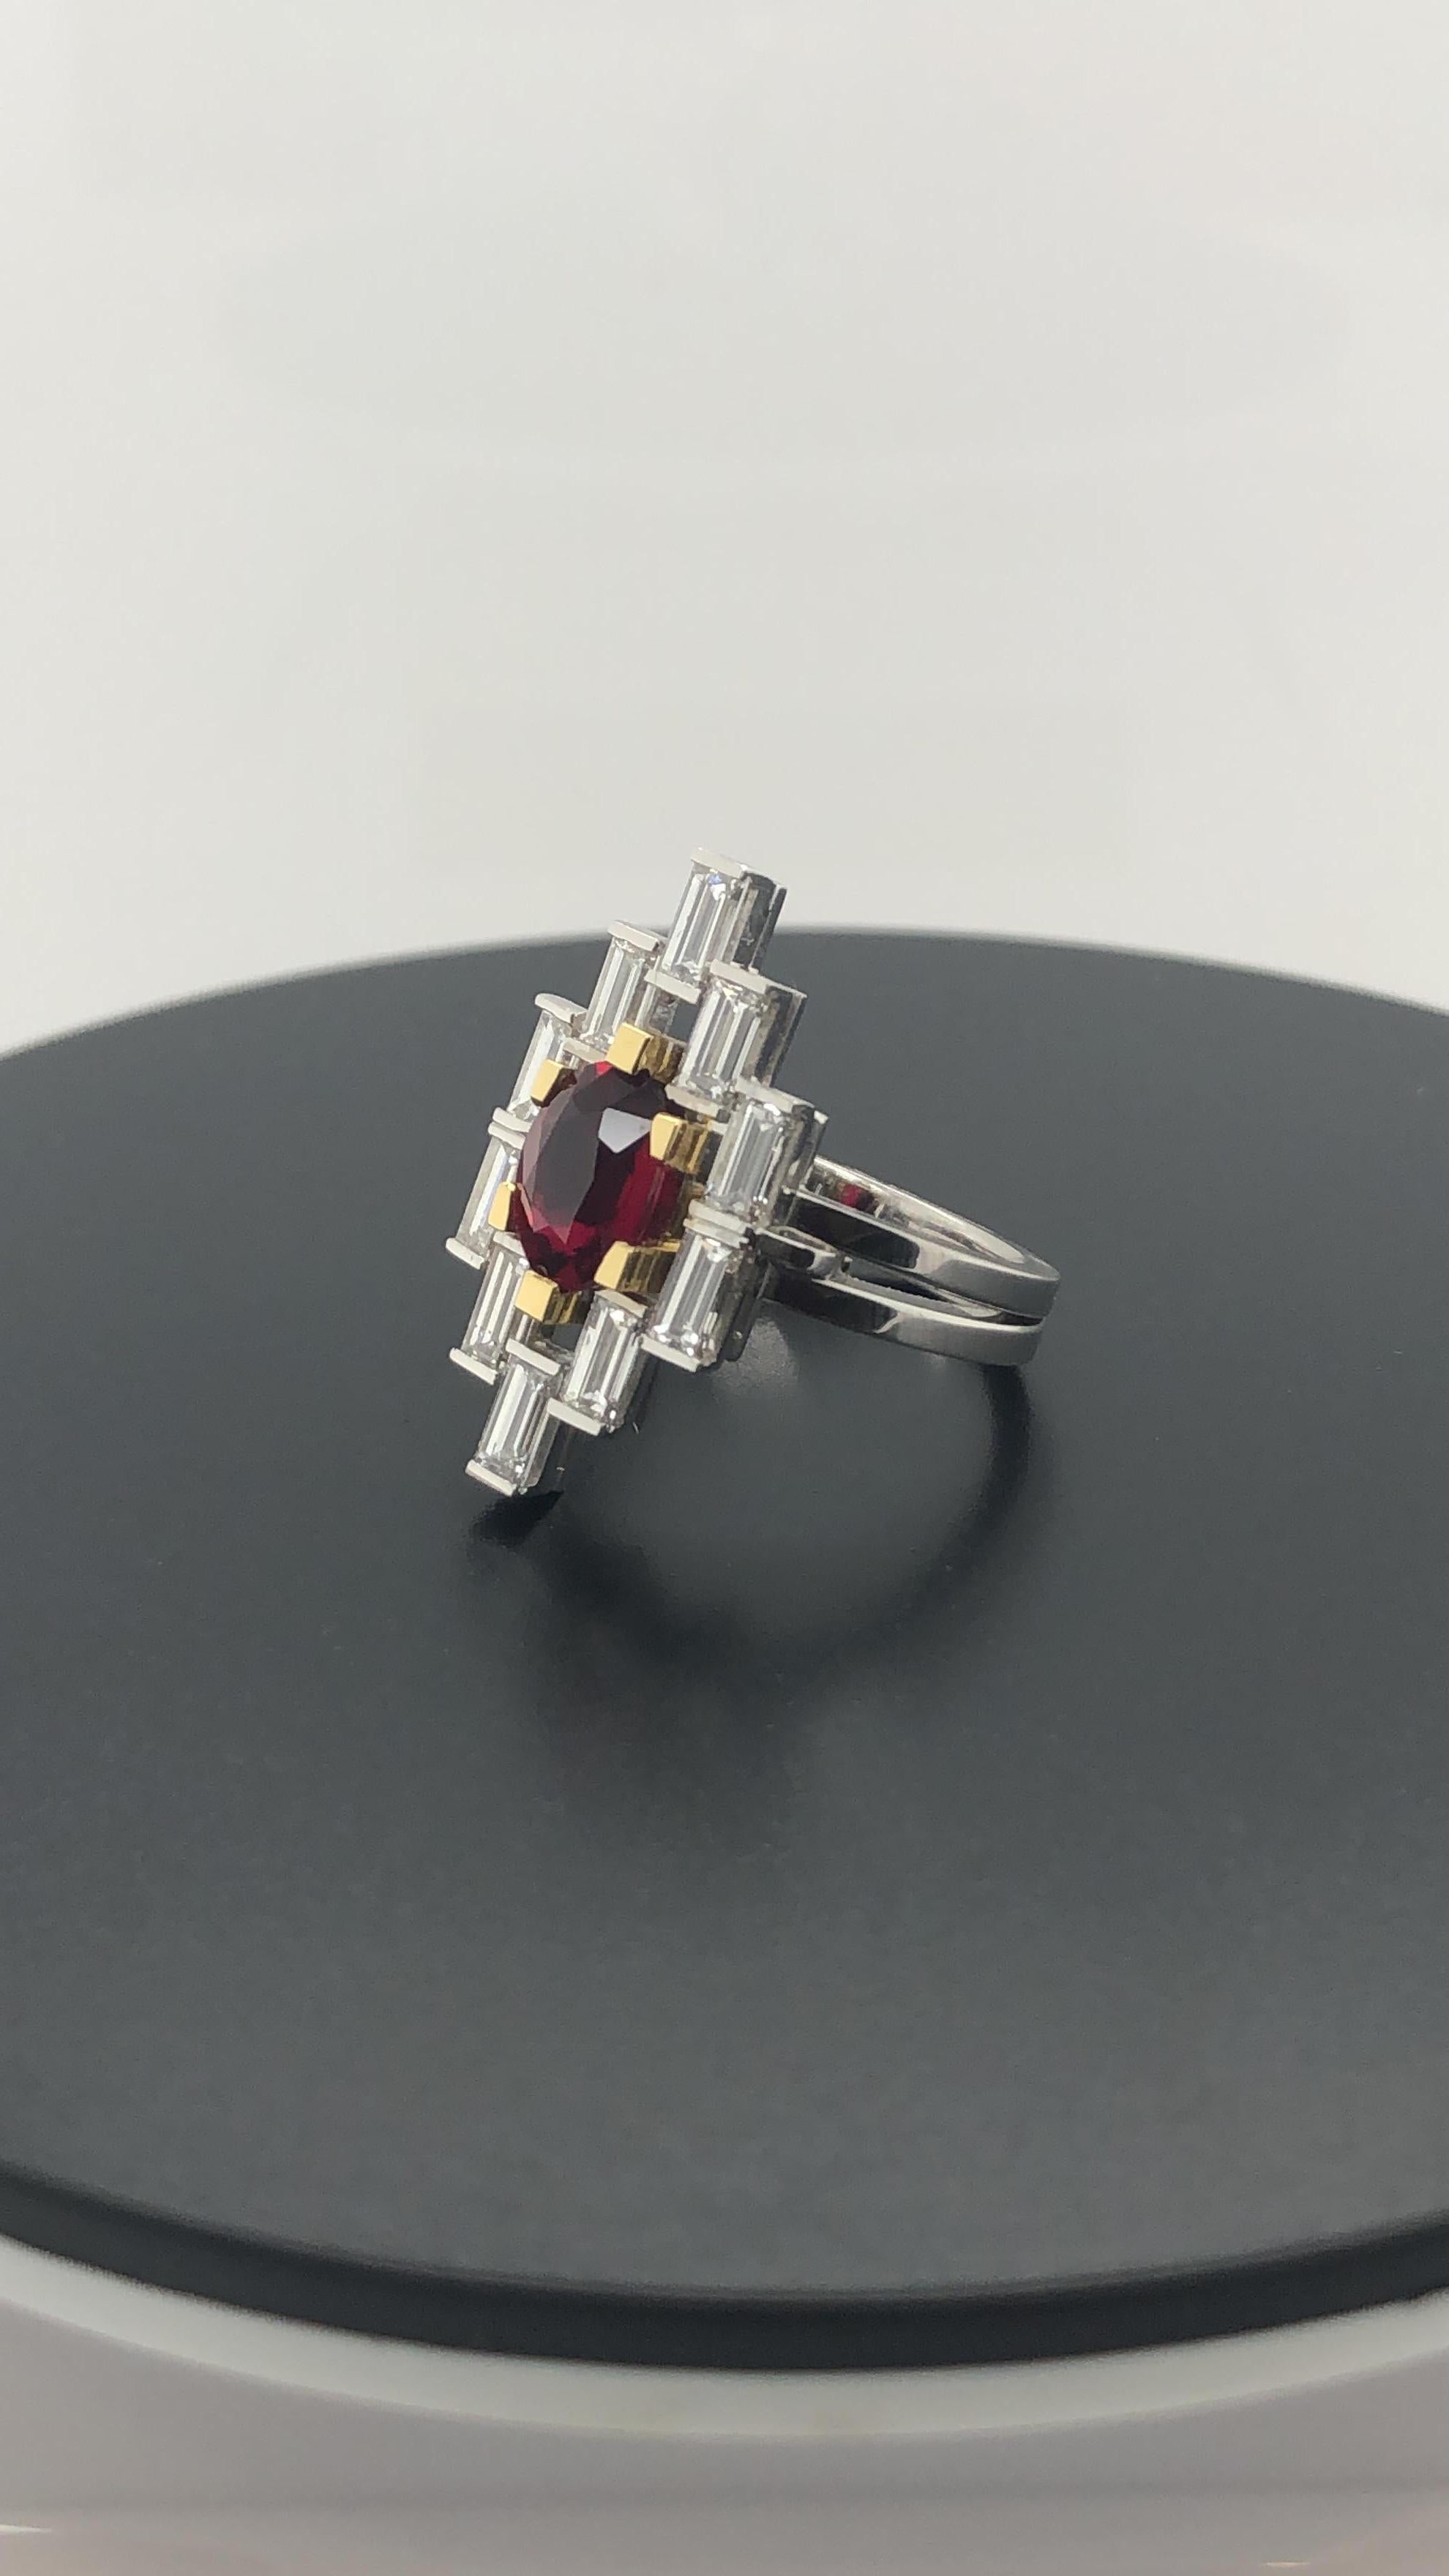 Handmade 18 Carat Yellow and White Gold Dress Ring, Set with One 1.55 Carat Certified Natural Oval Mozambique Ruby 